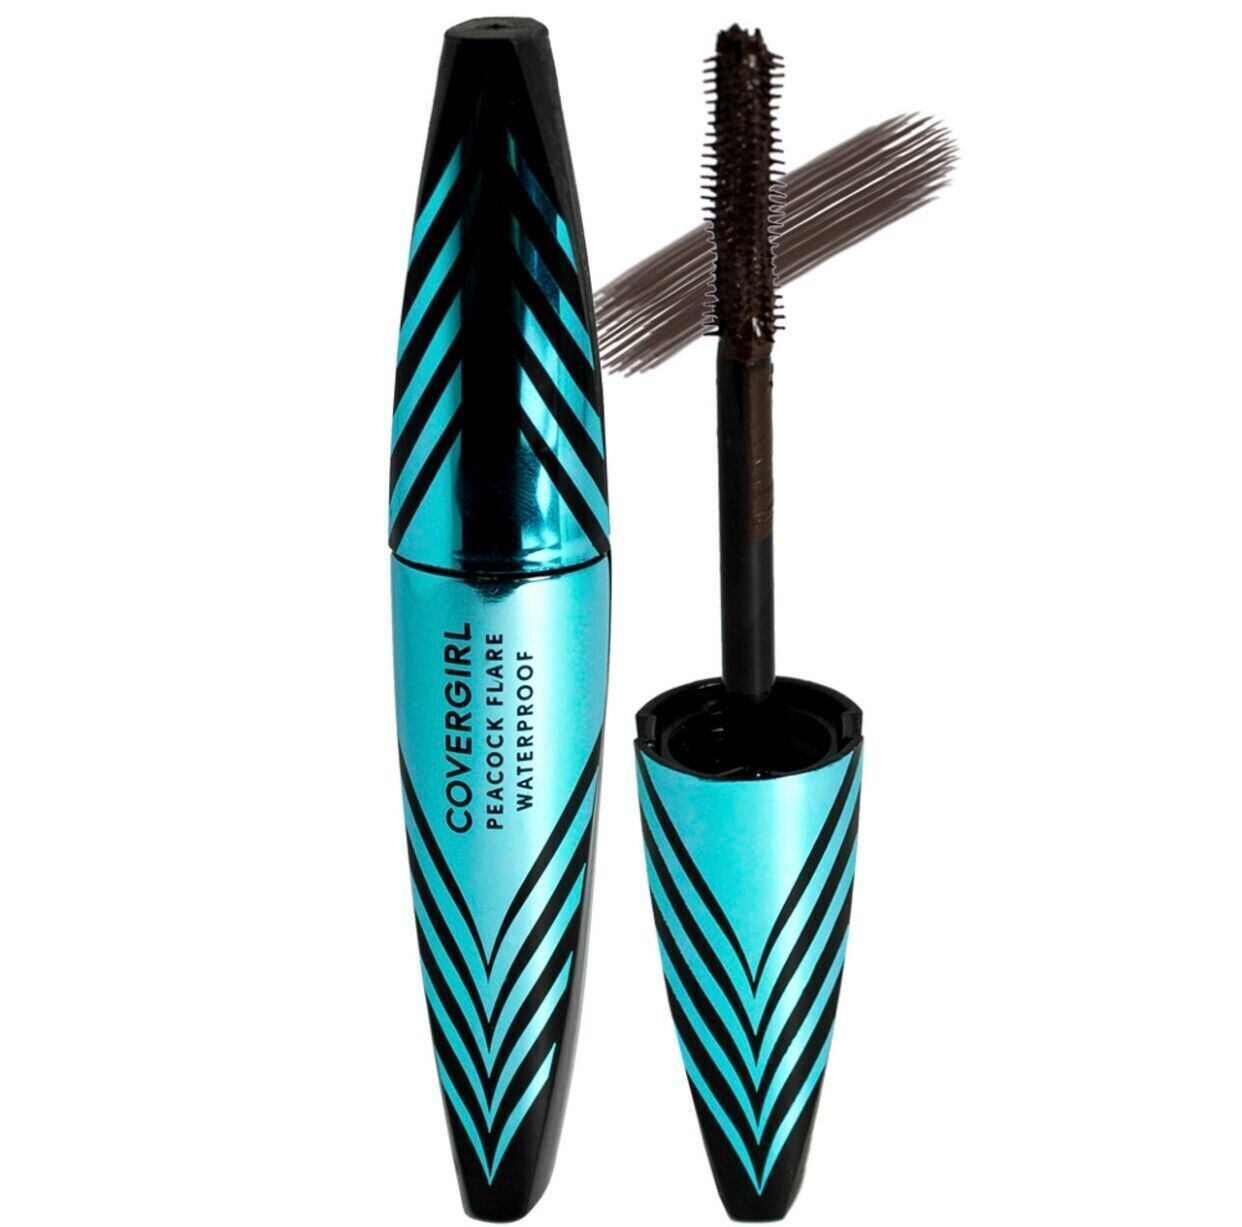 Primary image for CoverGirl Peacock Flare Mascara, Intense Black 790